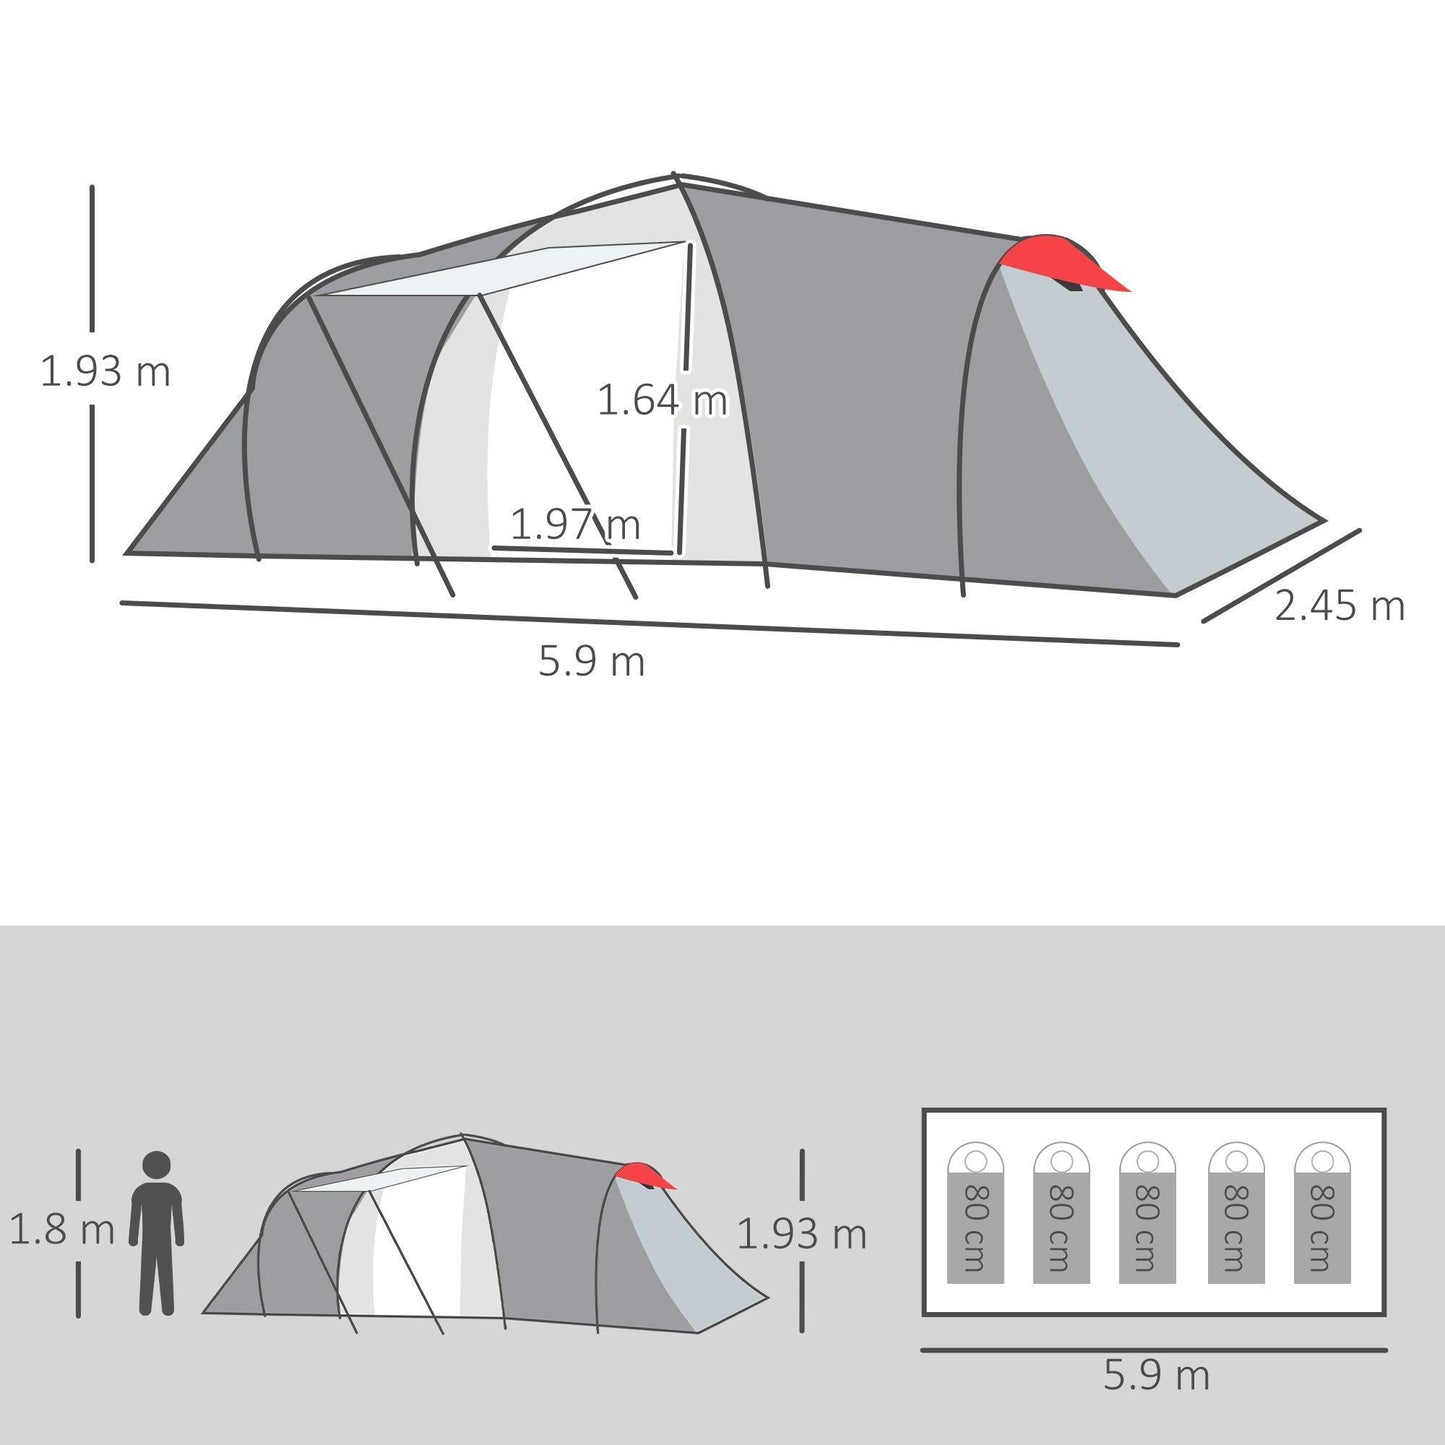 Outsunny Tunnel Tent: Spacious 4-6 Person Camping Shelter - ALL4U RETAILER LTD